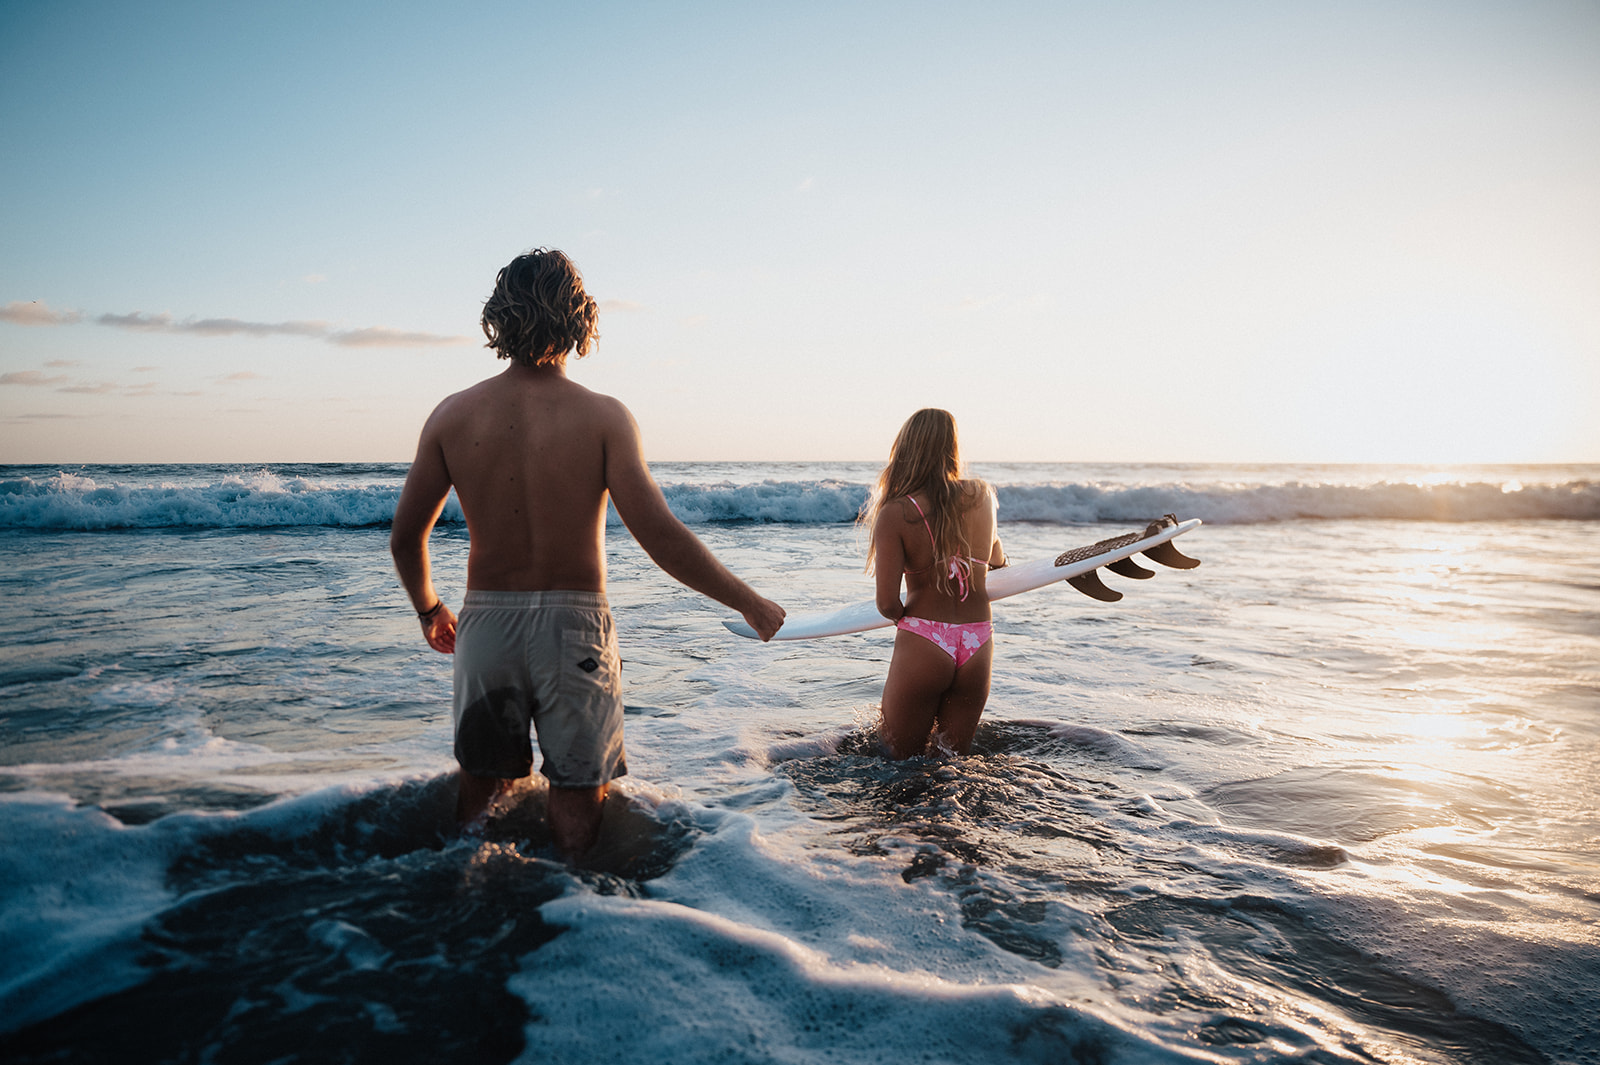 Surfer couple walks out into the ocean during sunset during the most amazing golden hour photo shoot